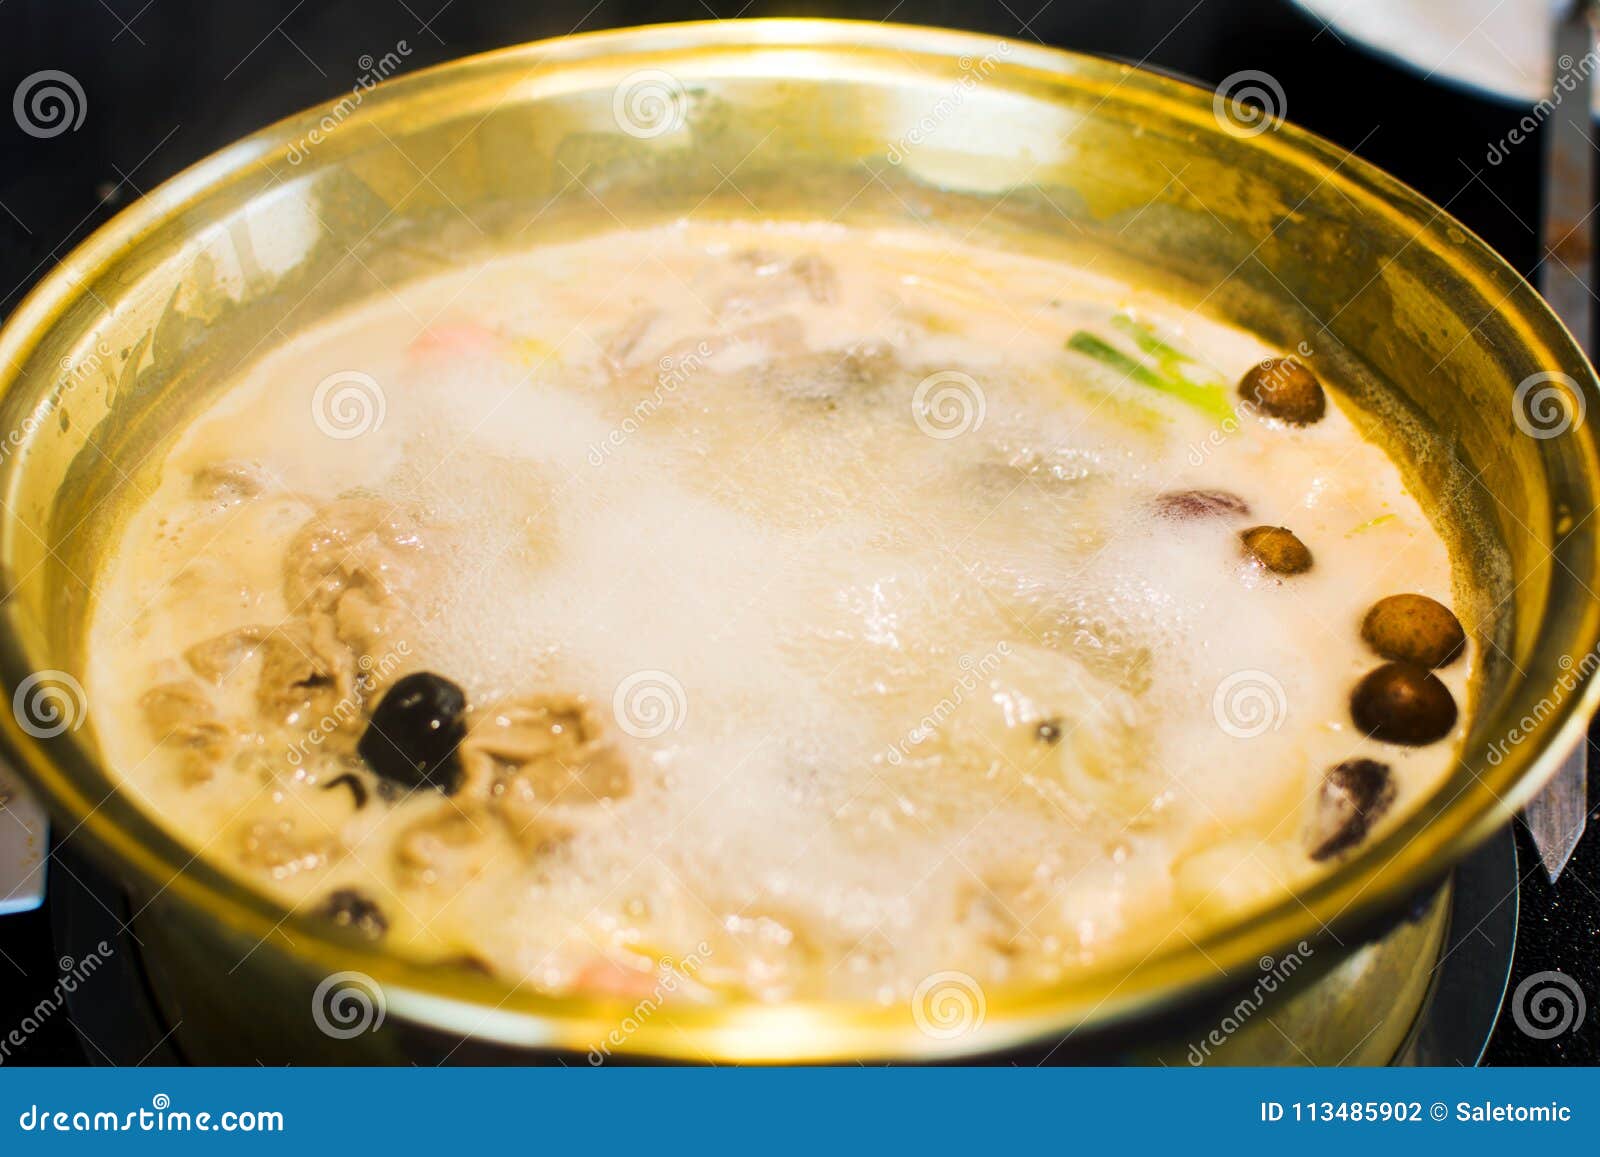 98,840 Boiling Hot Pot Royalty-Free Images, Stock Photos